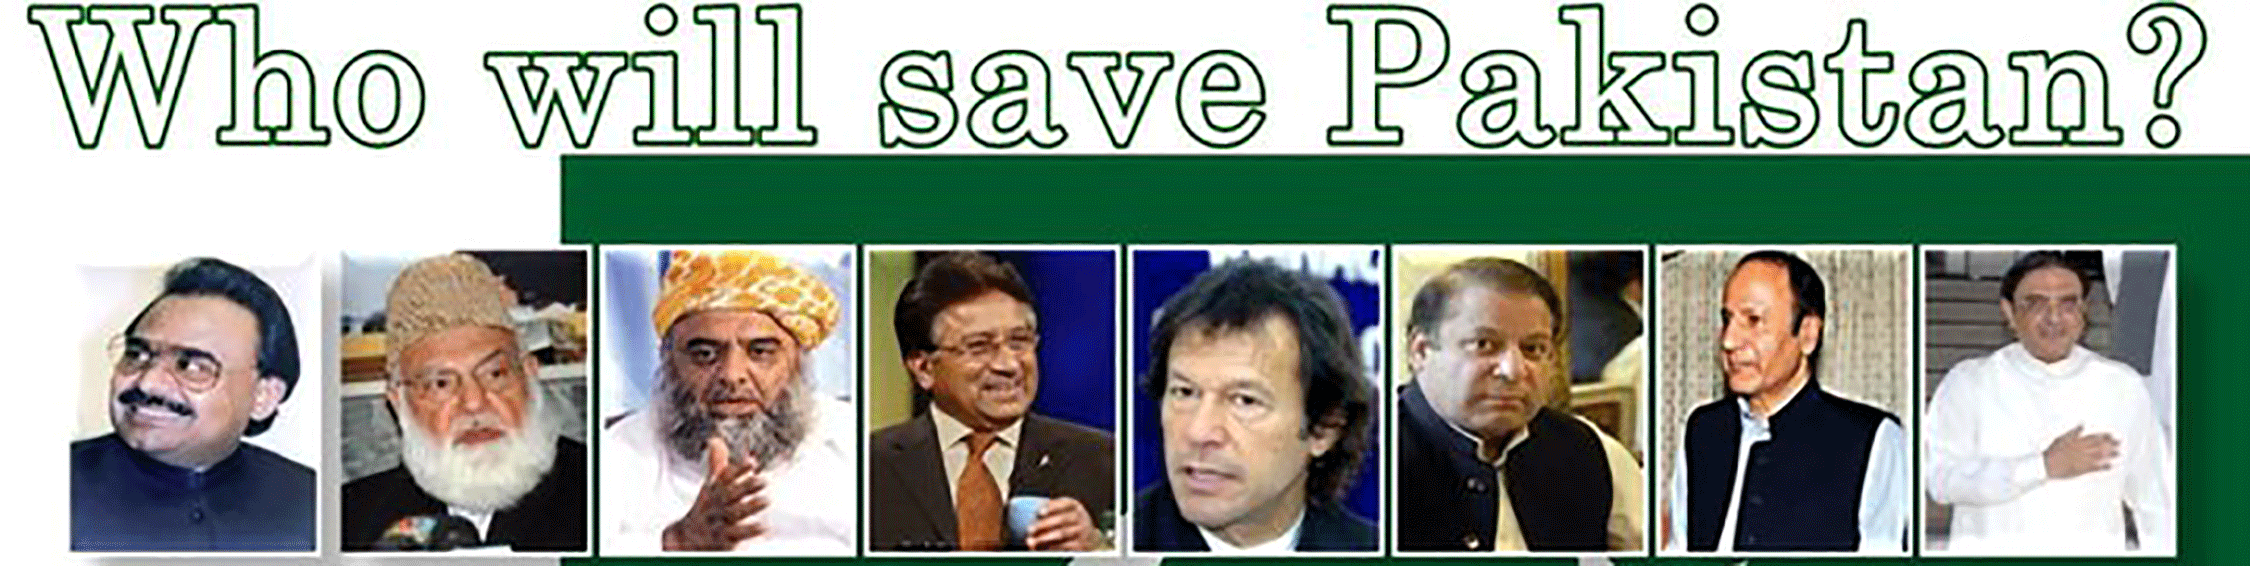 Who Will Save Pakistan?